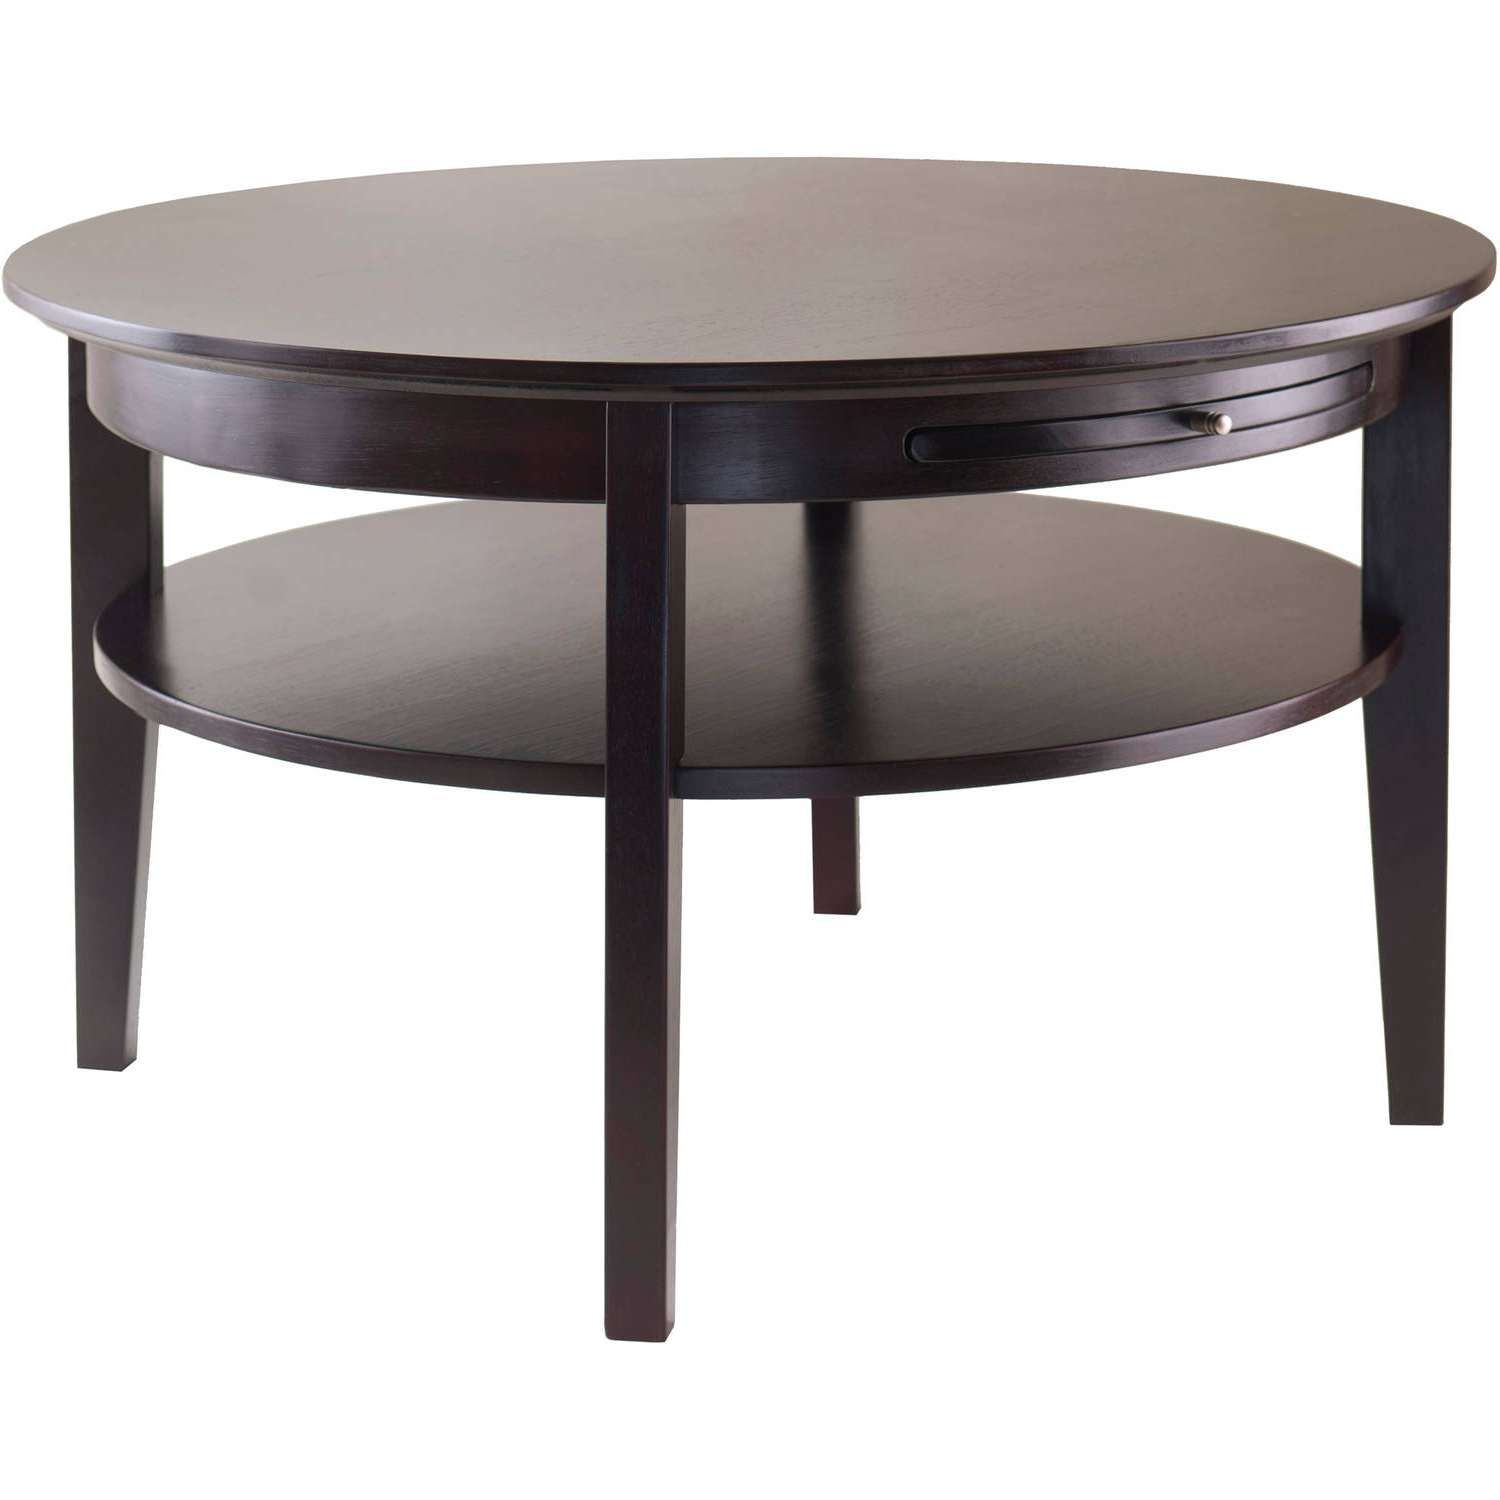 Famous Very Large Coffee Tables In Coffee Tables : Simple Wood Square Coffee Tables And Oversized (View 7 of 20)